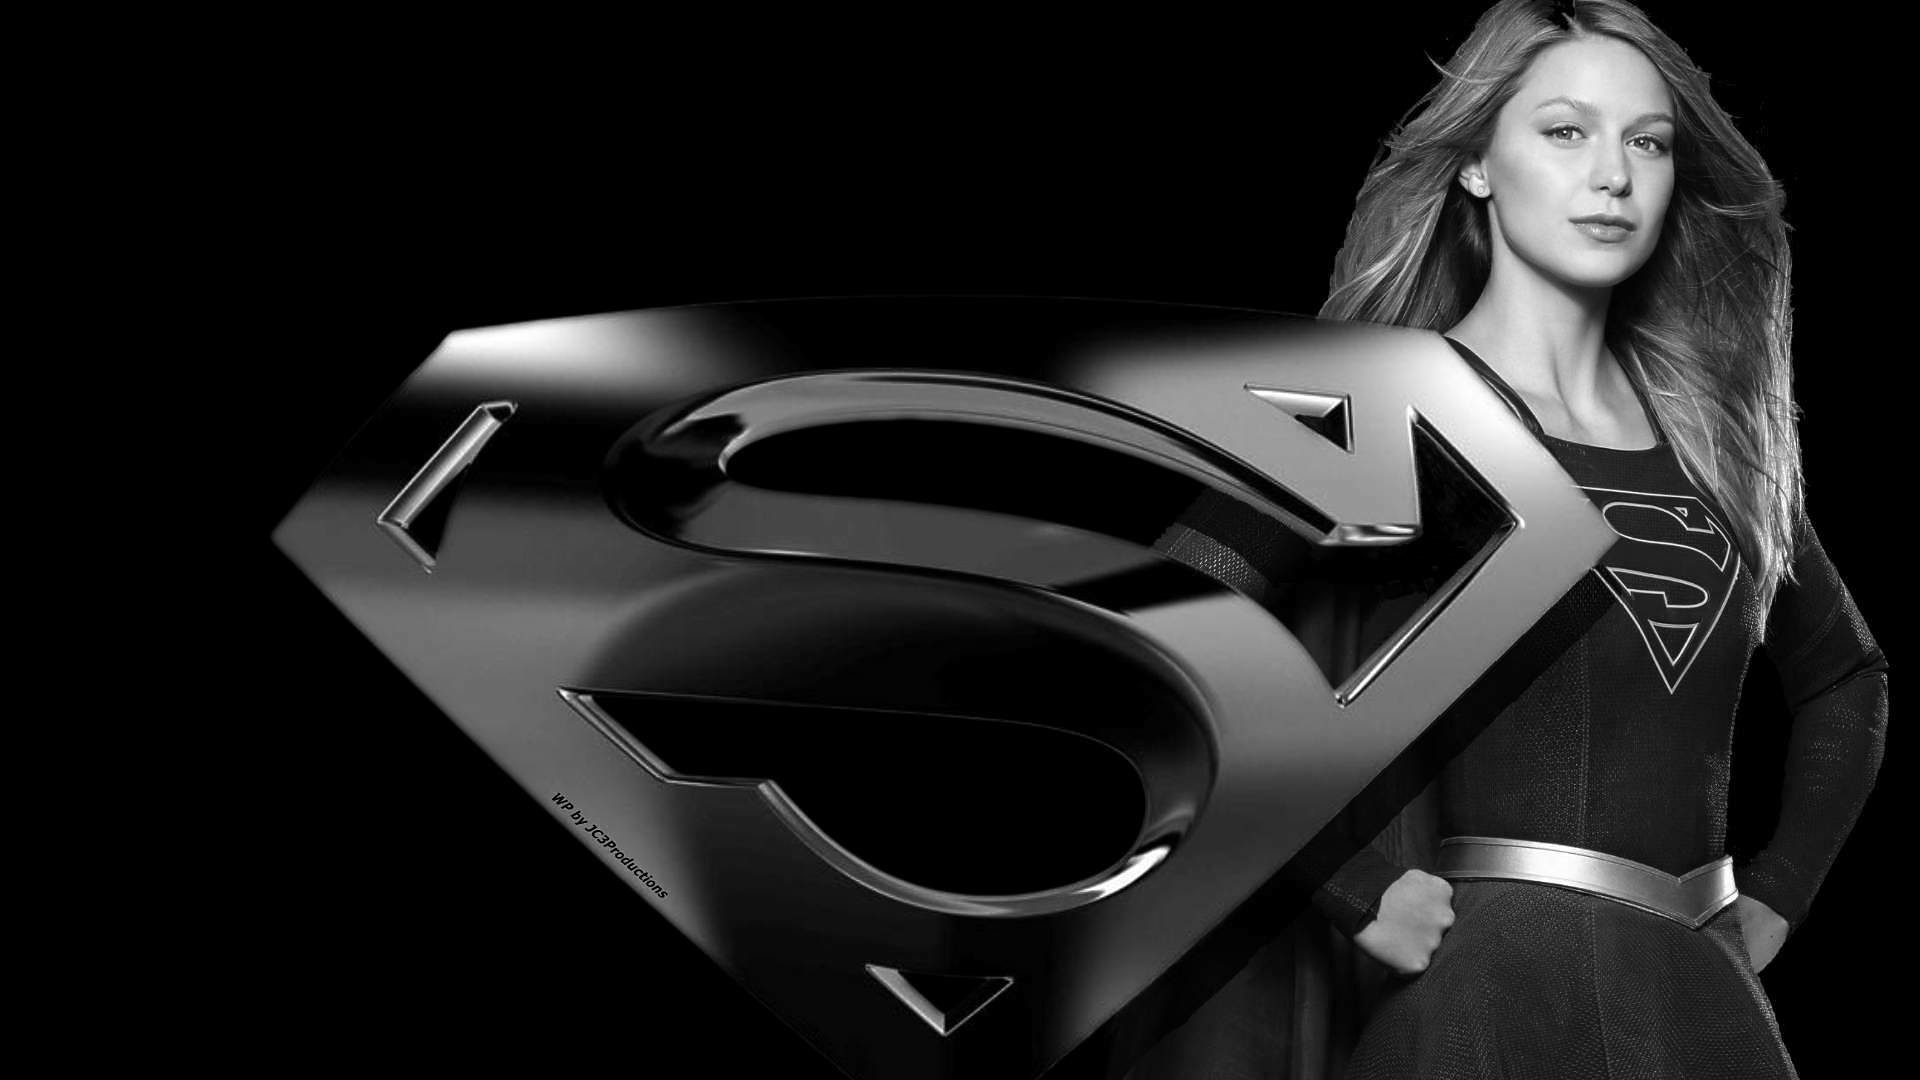 1920x1080 DC Comics images Supergirl and icon 4 wallpaper HD wallpaper and background  photos